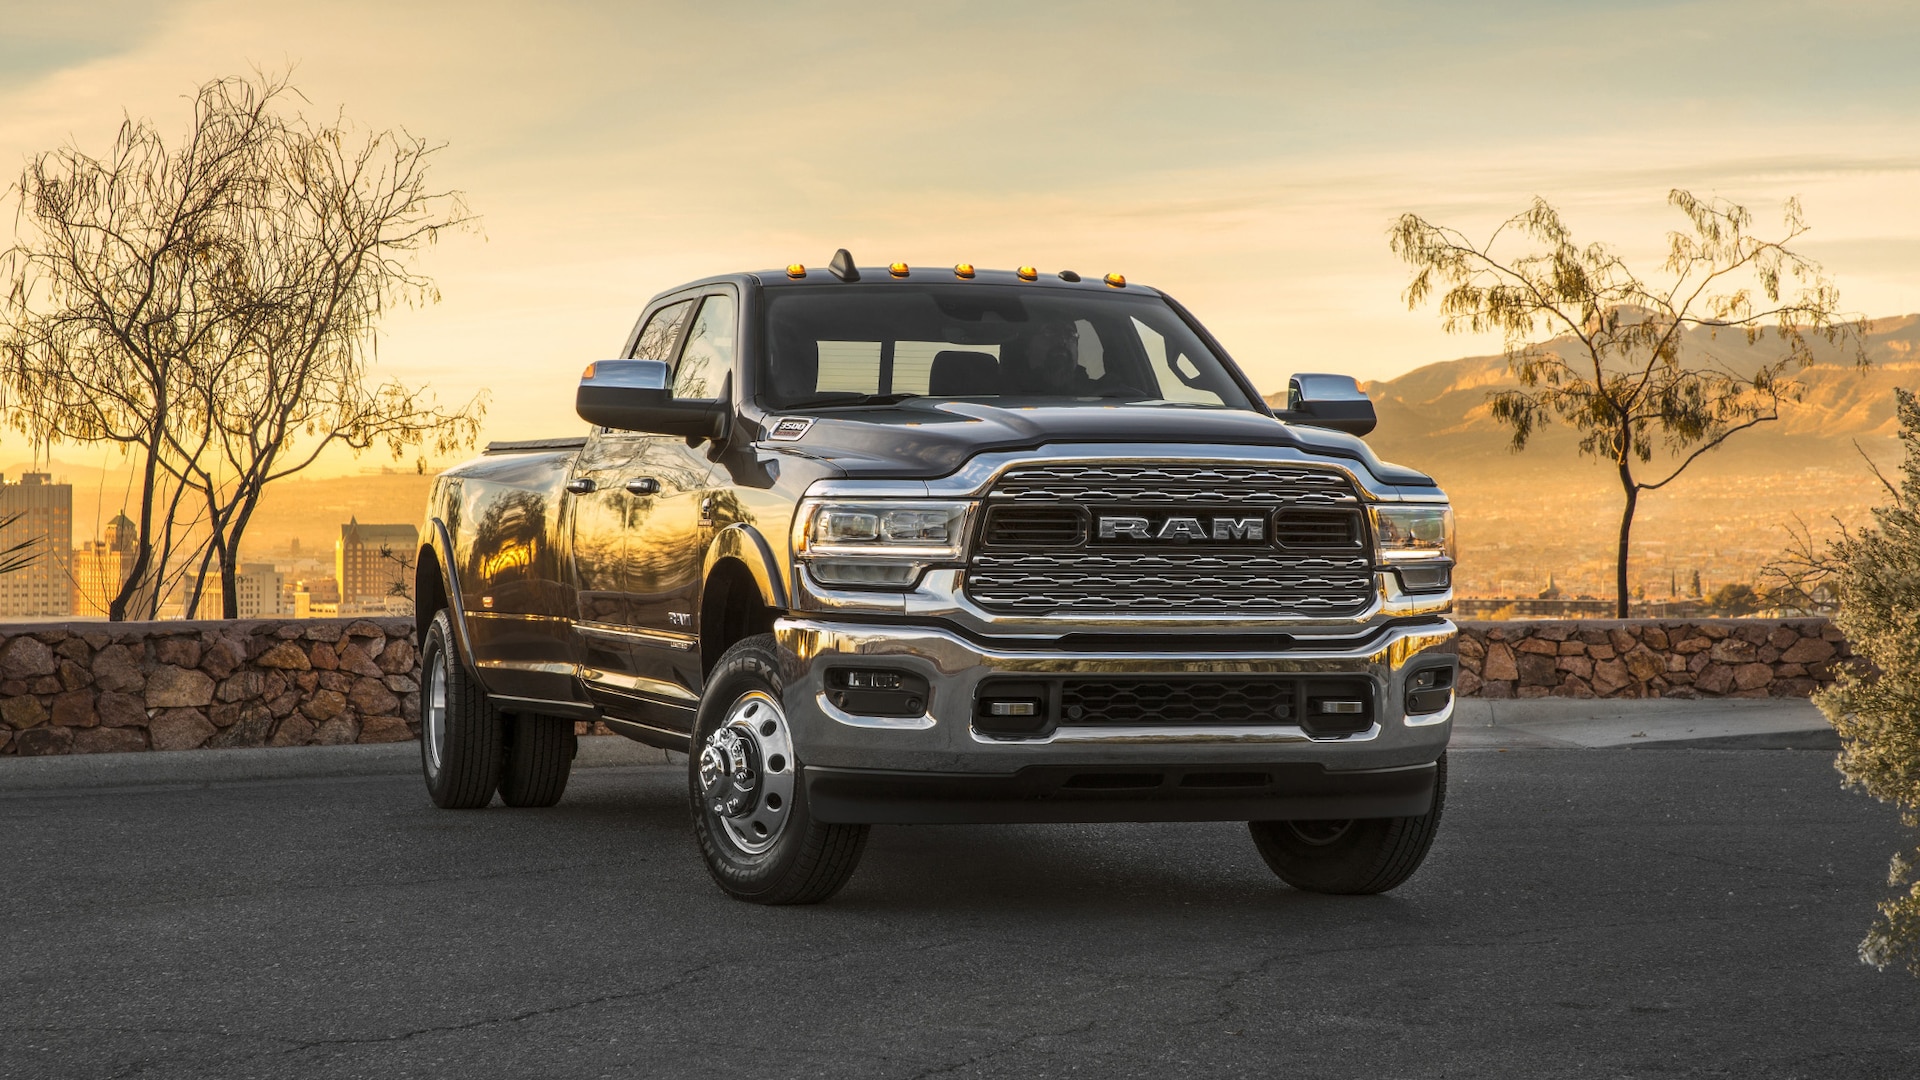 2021 Ram 3500 Prices, Reviews, and Photos - MotorTrend